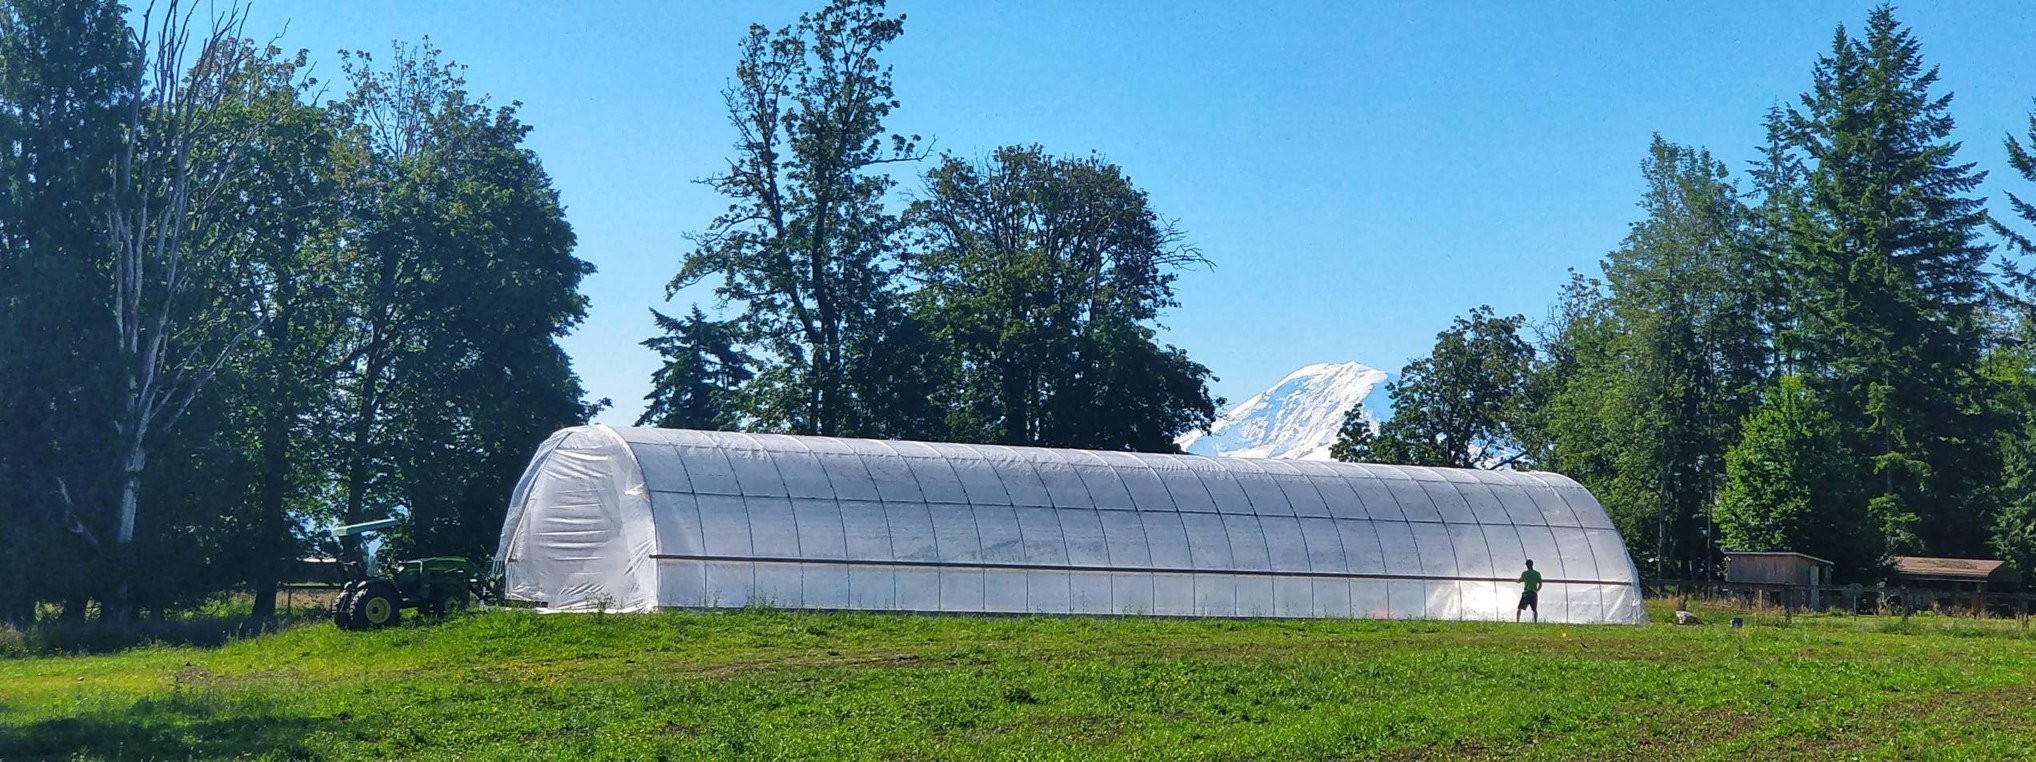 a high tunnel greenhouse placed in an open field